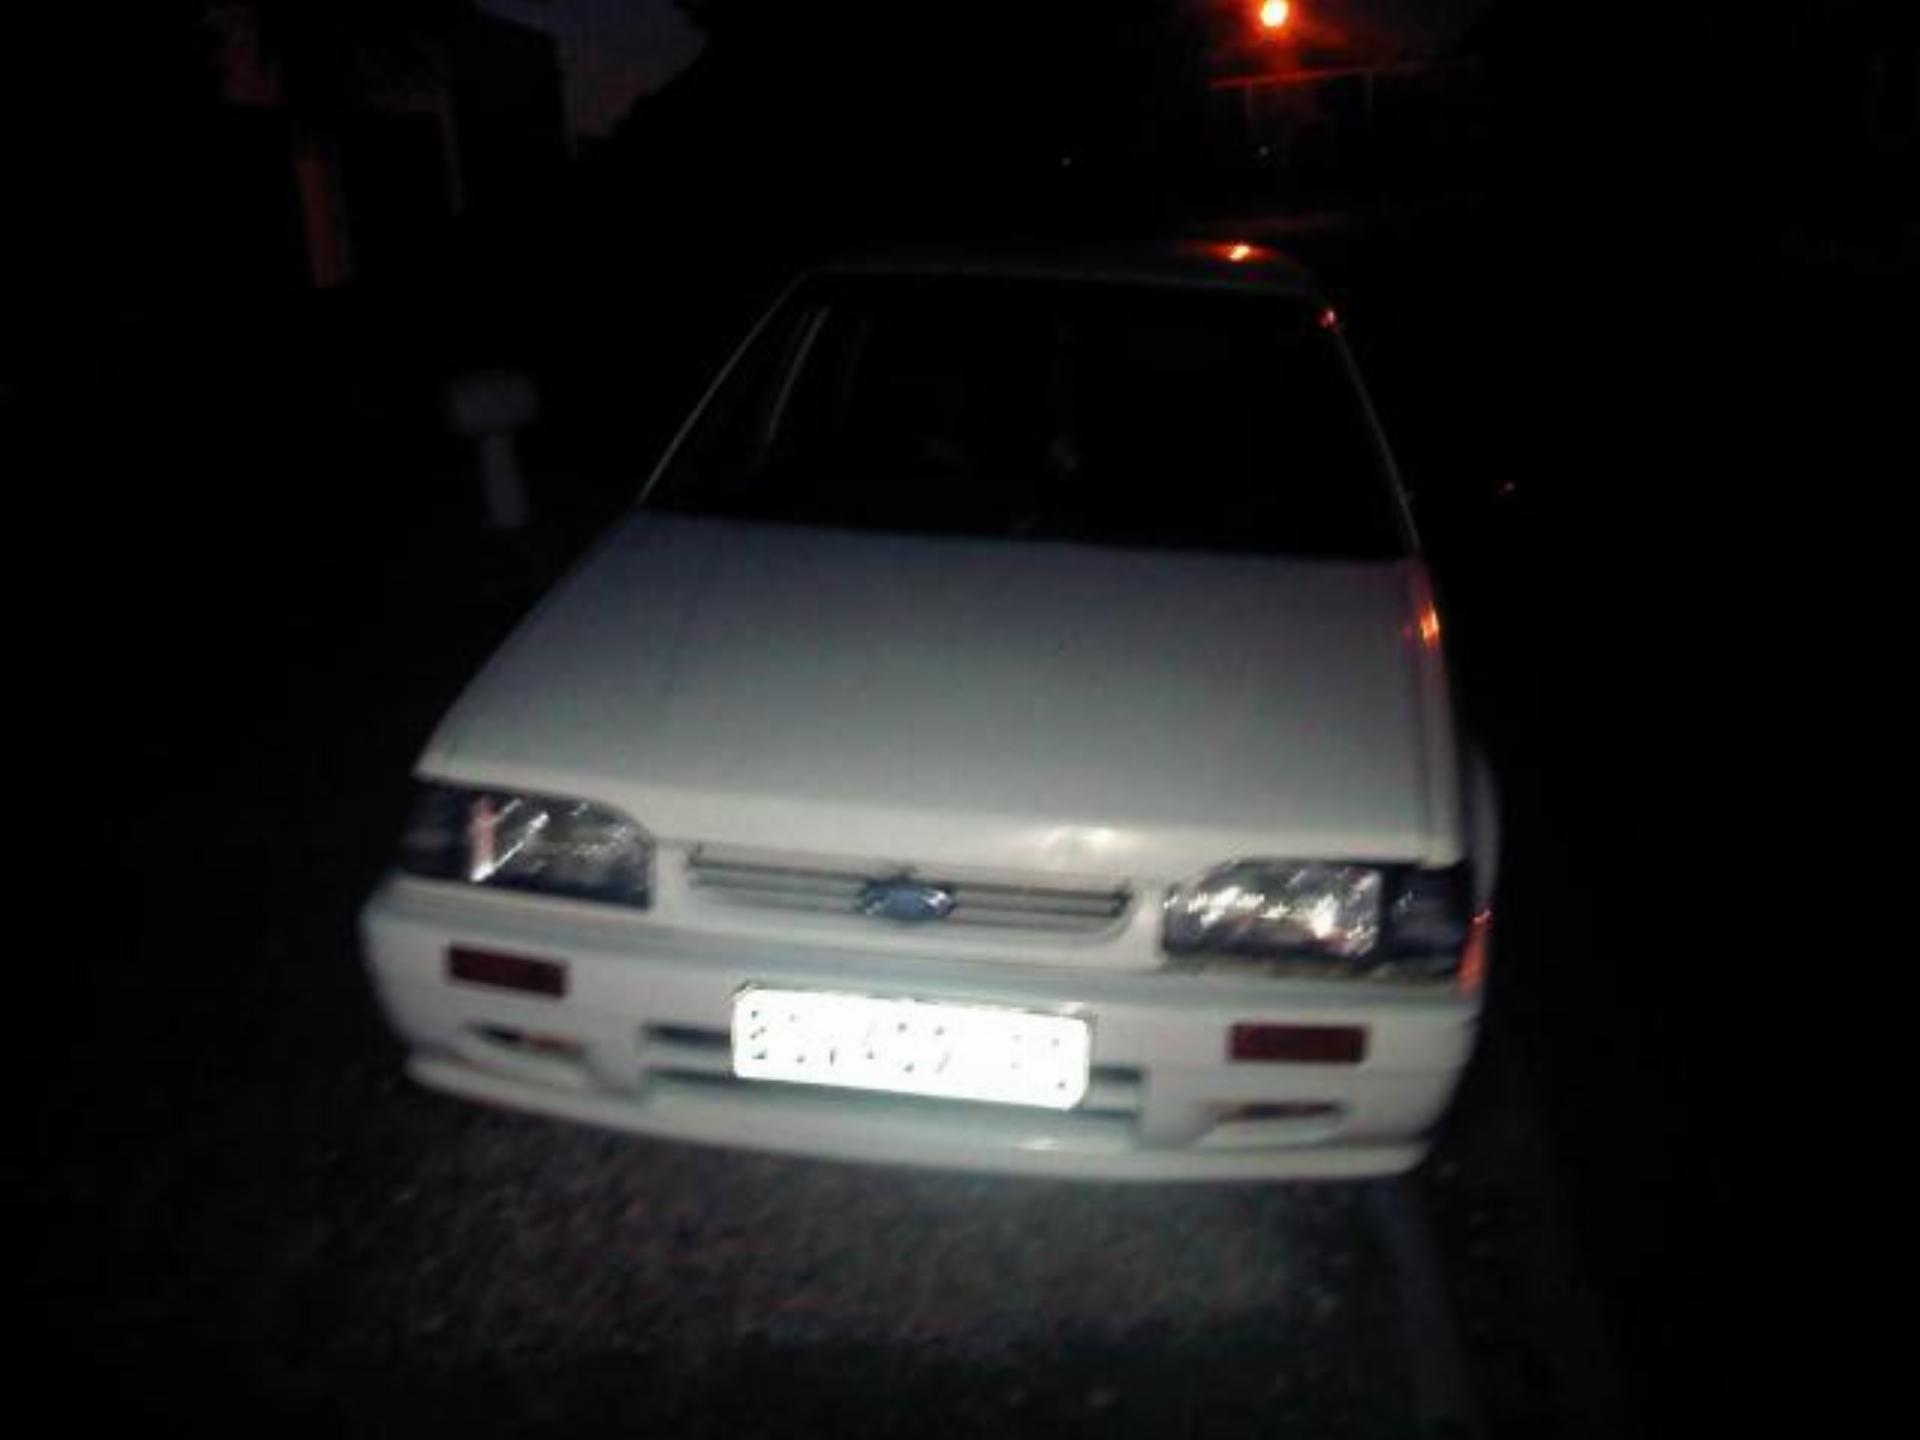 Ford Laser 1.3 Tonic